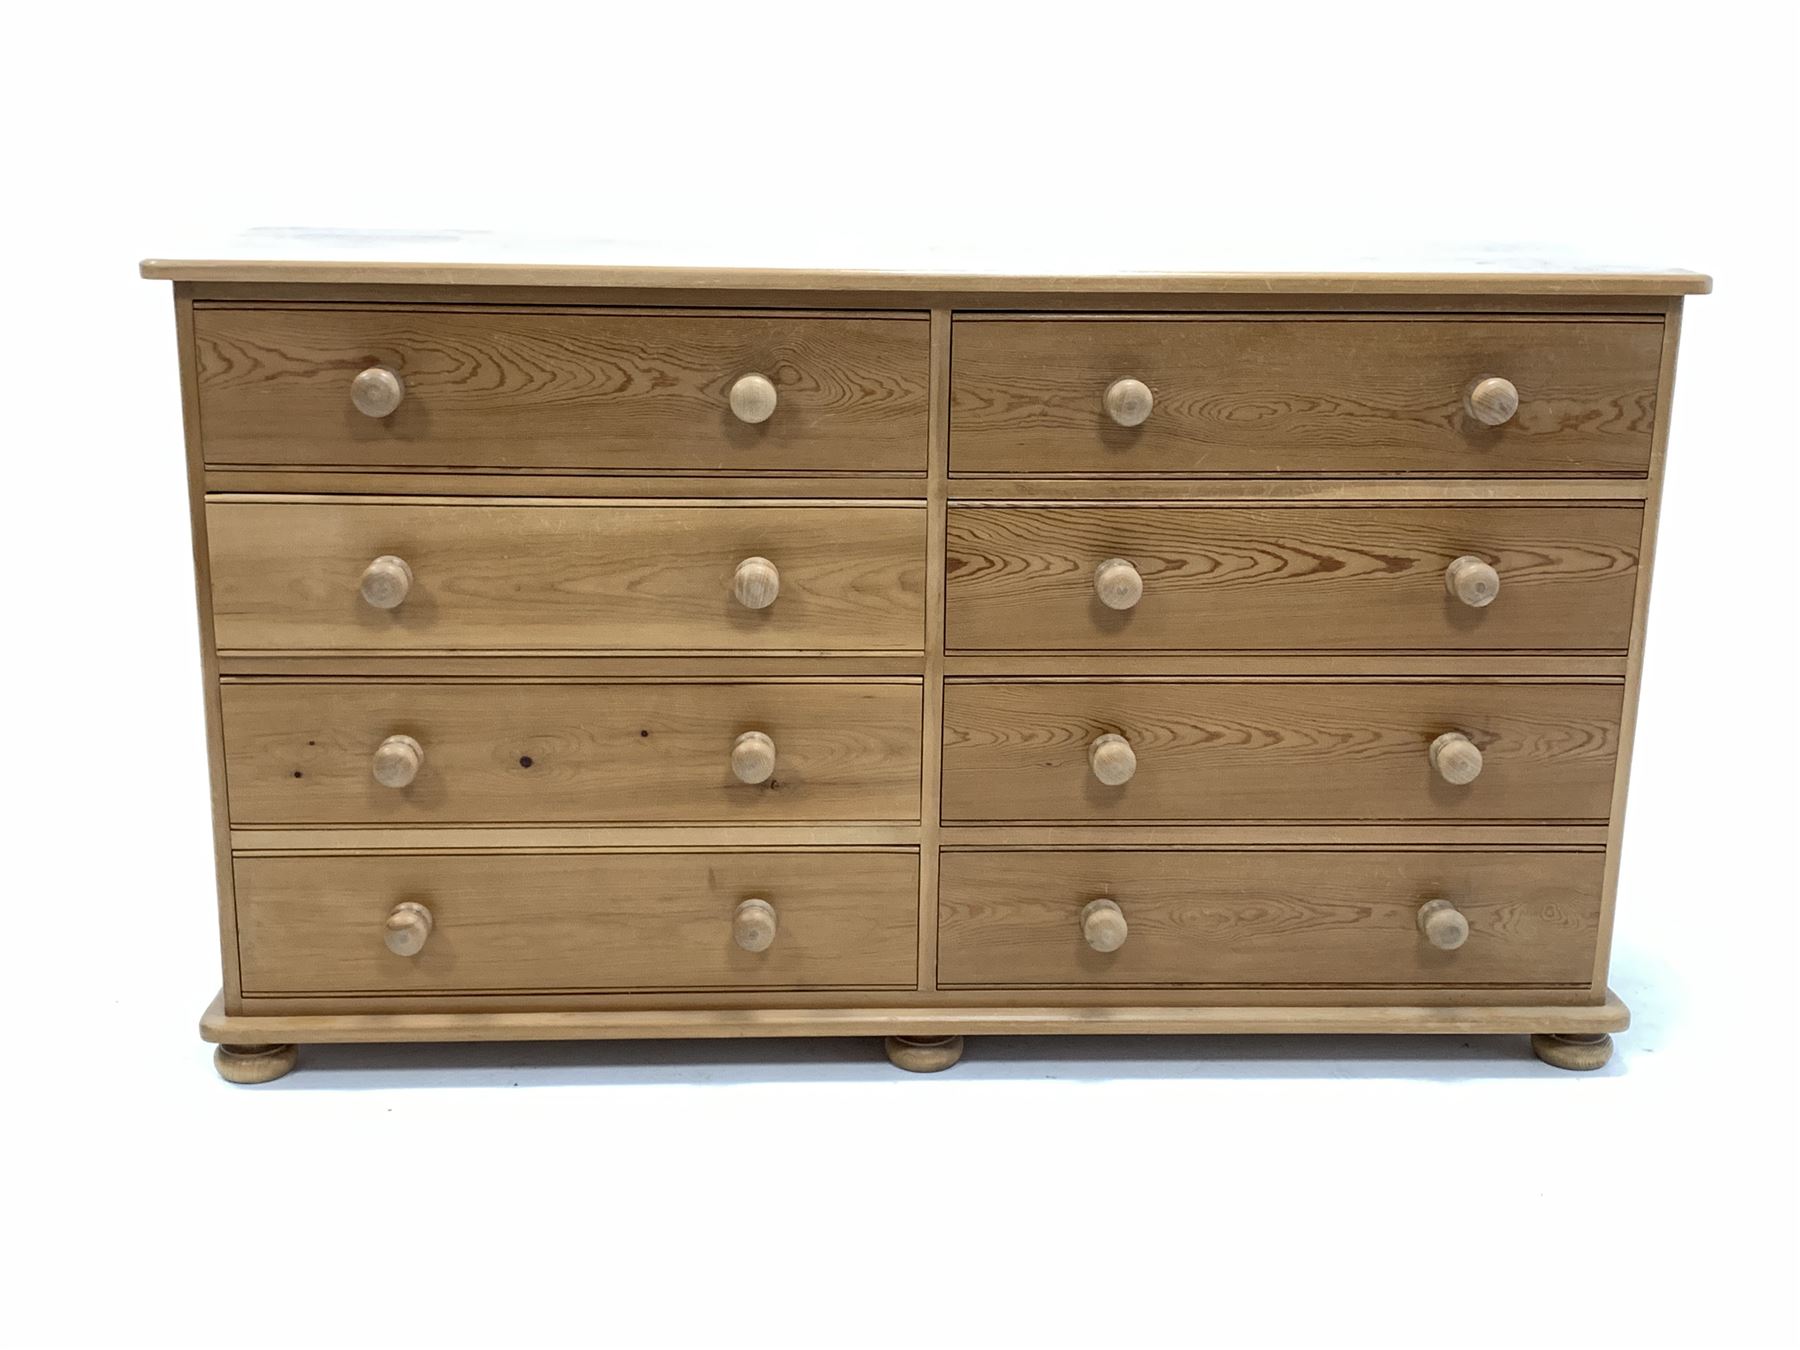 Solid pine chest - Image 2 of 3